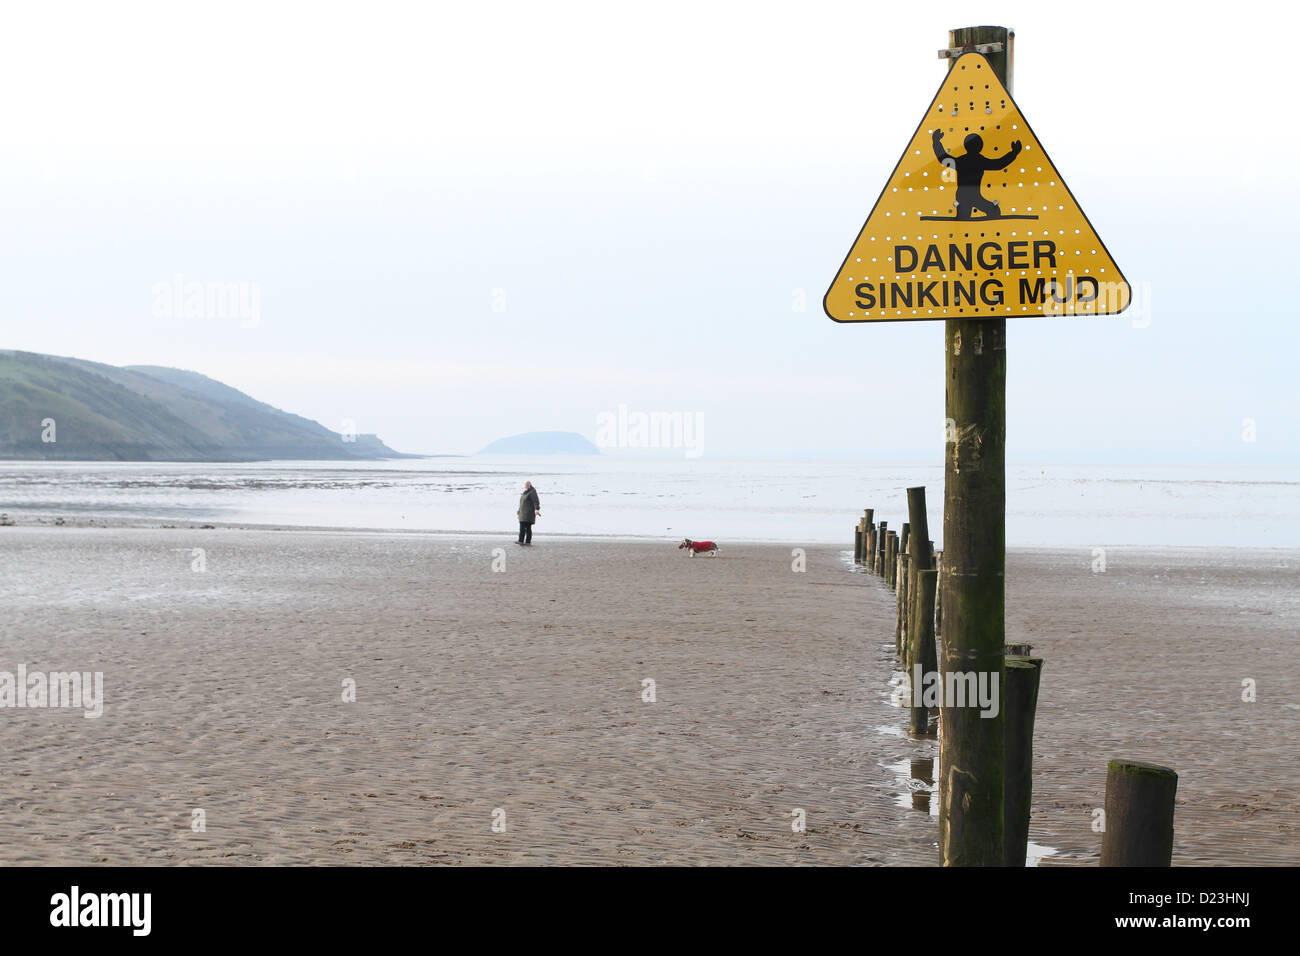 Danger sinking mud warning sign on the beach at Uphill, near Weston super Mare, January 2013 Stock Photo